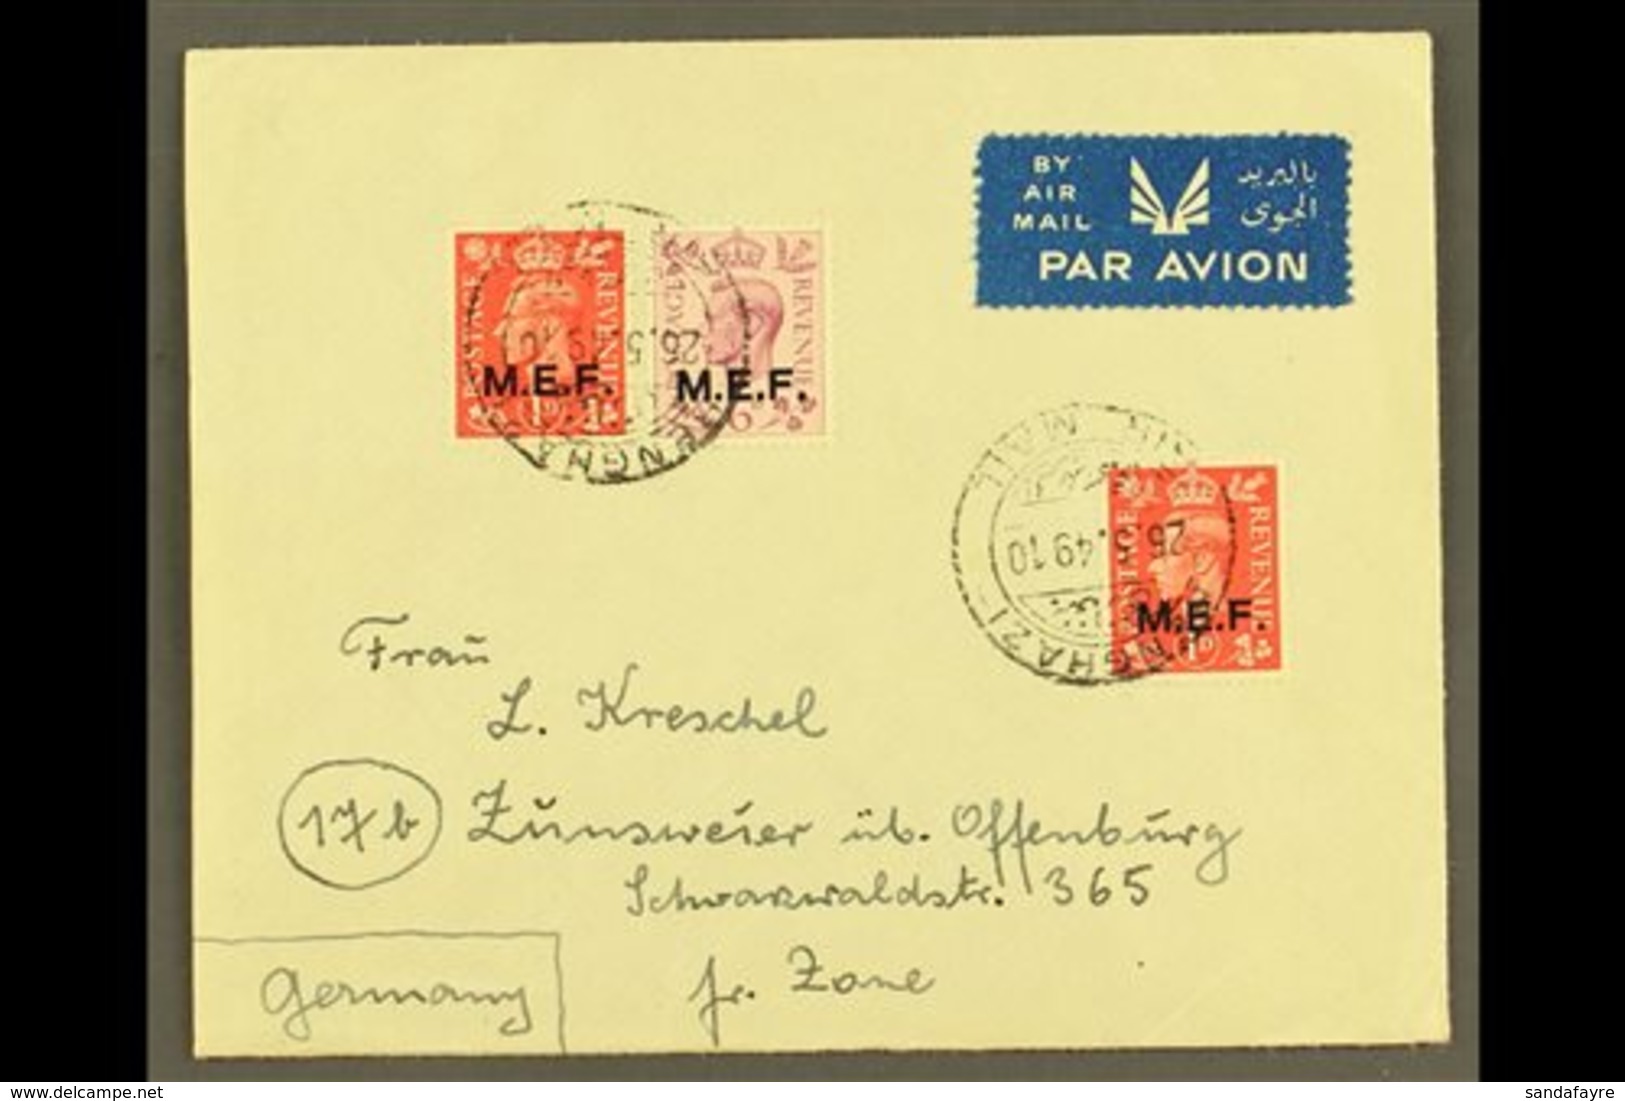 CYRENAICA 1949 Airmailed Cover To French Zone, Germany, Franked KGVI 1d X2 & 6d "M.E.F." Ovpts, SG M11, M16, Benghazi 26 - Italian Eastern Africa